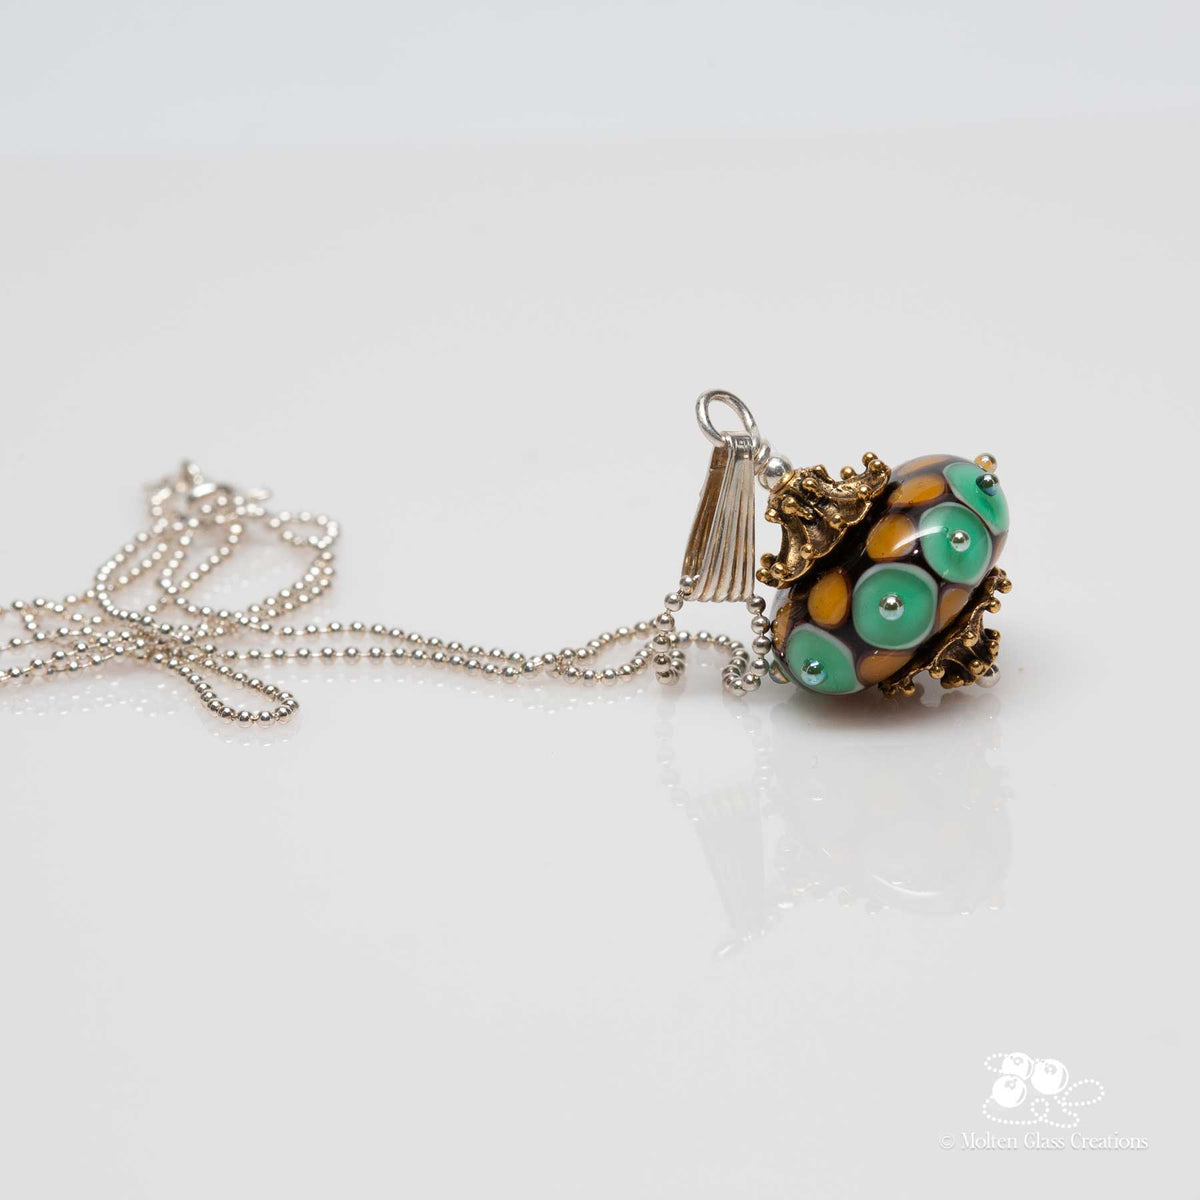 Vintage Teal Delight Necklace - Molten Glass Creations